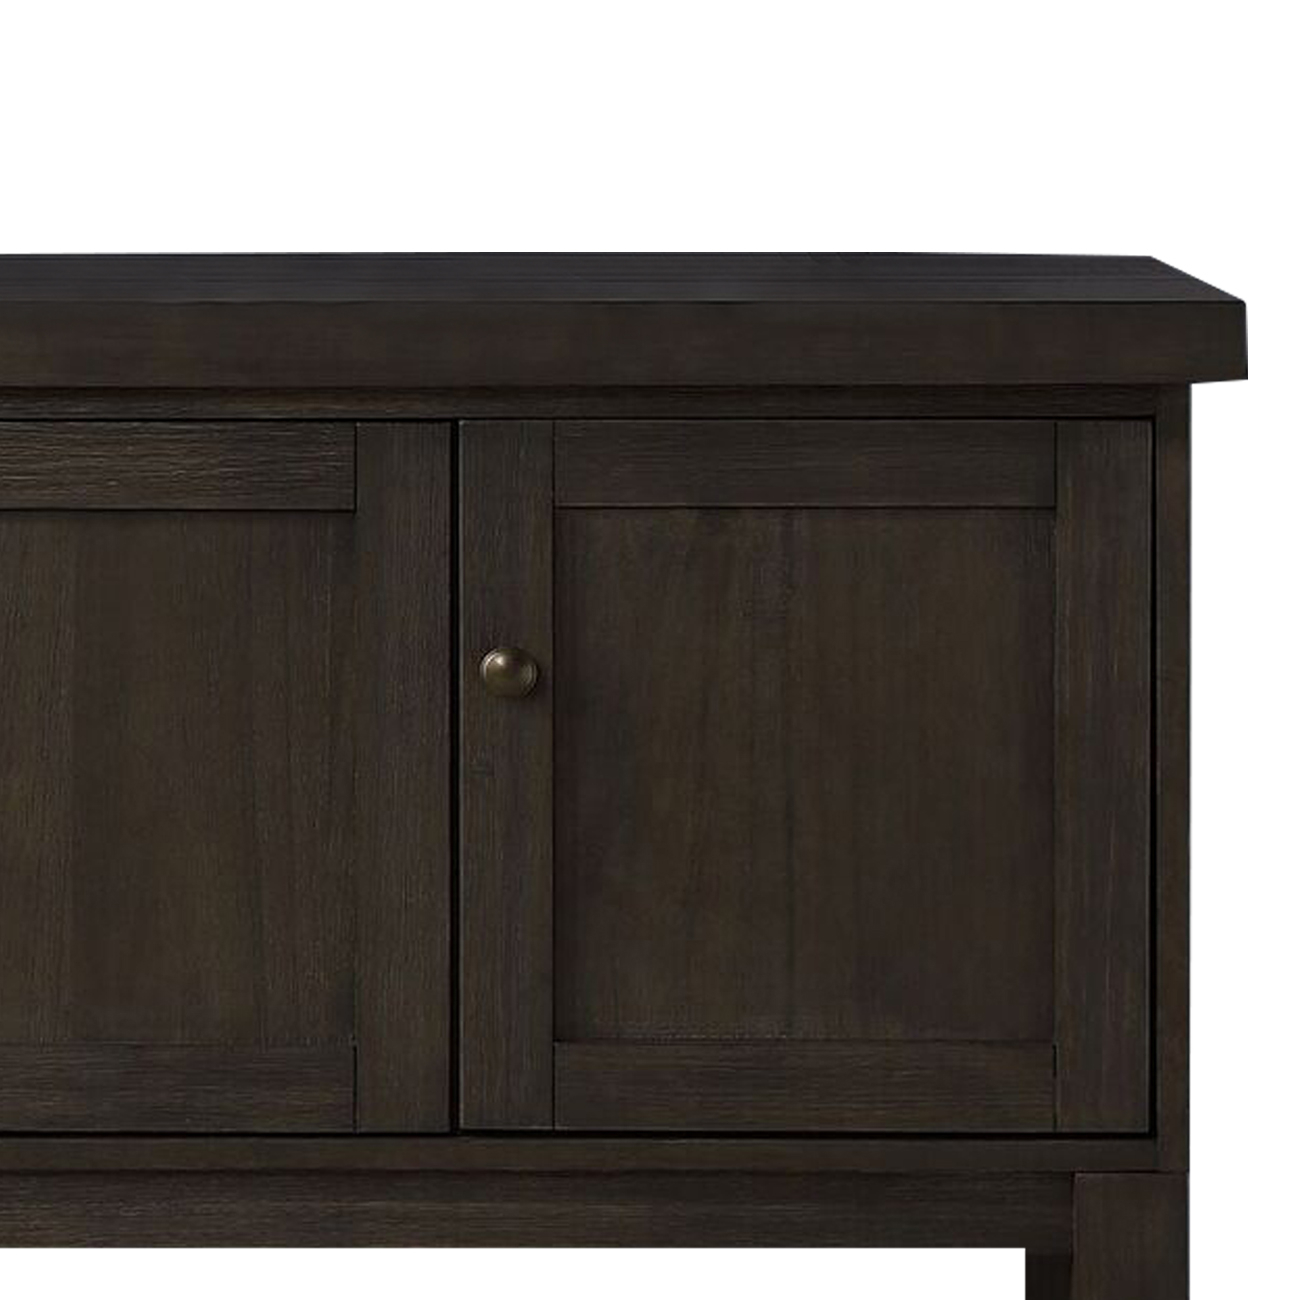 Transitional Style Server With 3 Doors And Open Bottom Shelf, Brown- Saltoro Sherpi